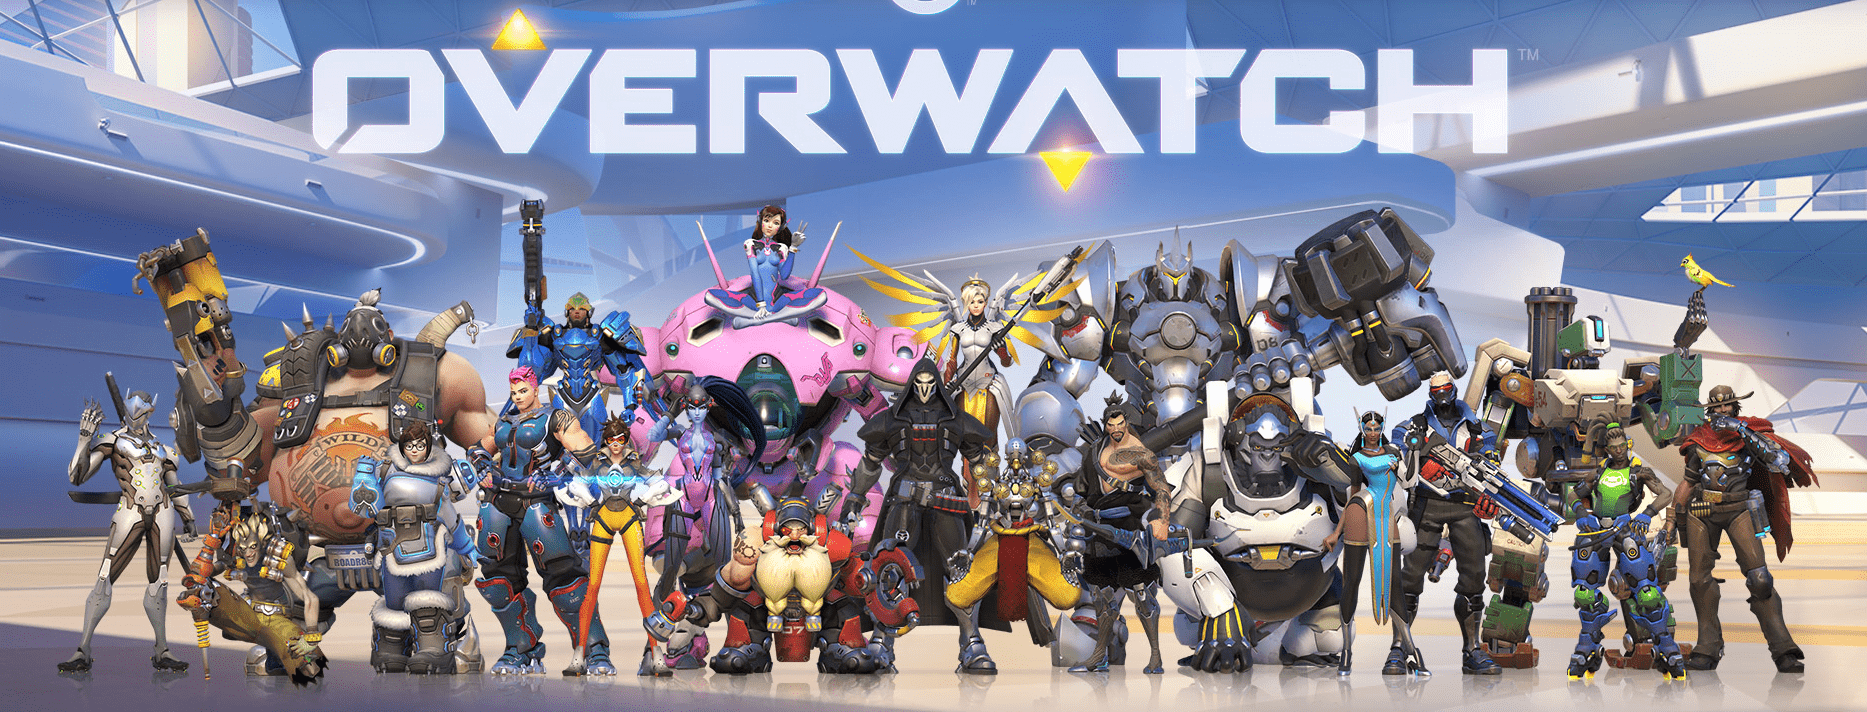 Overwatch Update Version 2.70 Full New Patch Notes PS4 Full Details Here 2019